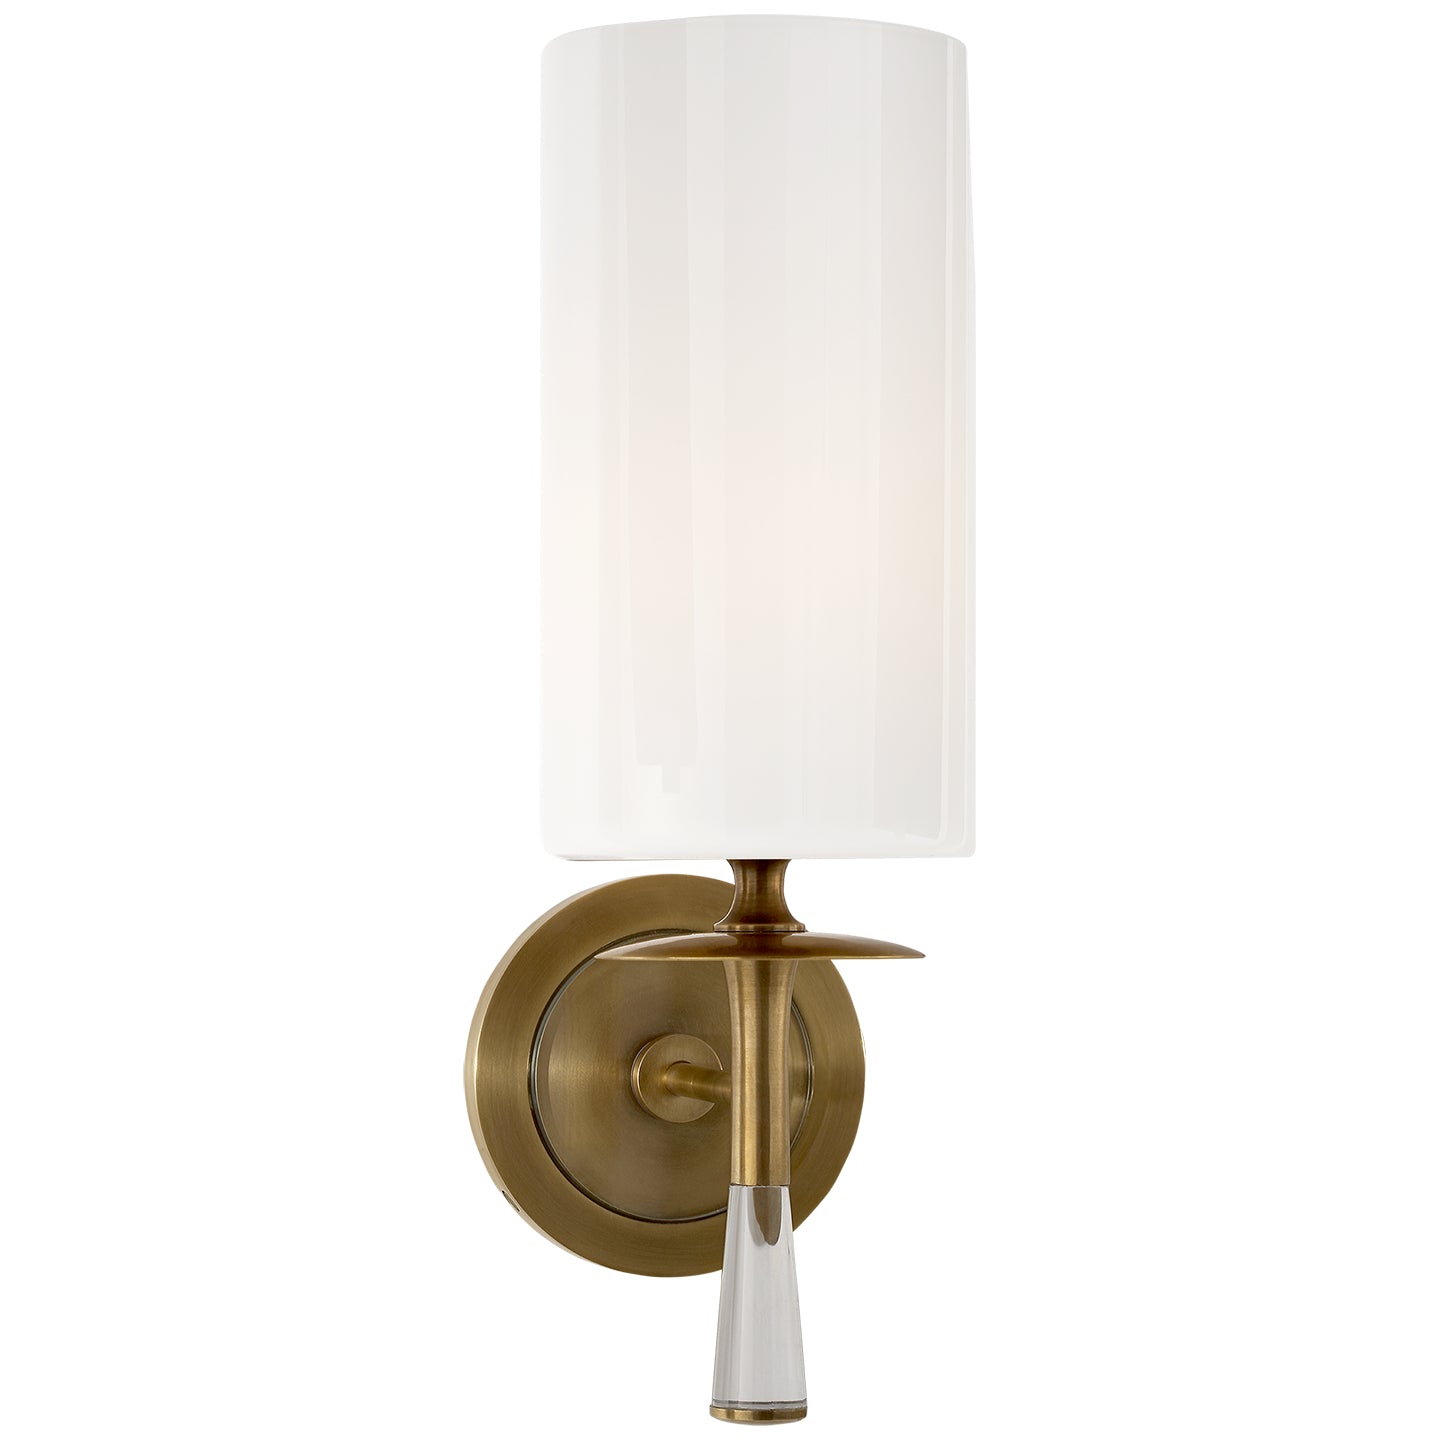 Visual Comfort Signature - ARN 2018HAB/CG-WG - One Light Wall Sconce - drunmore - Hand-Rubbed Antique Brass with Crystal